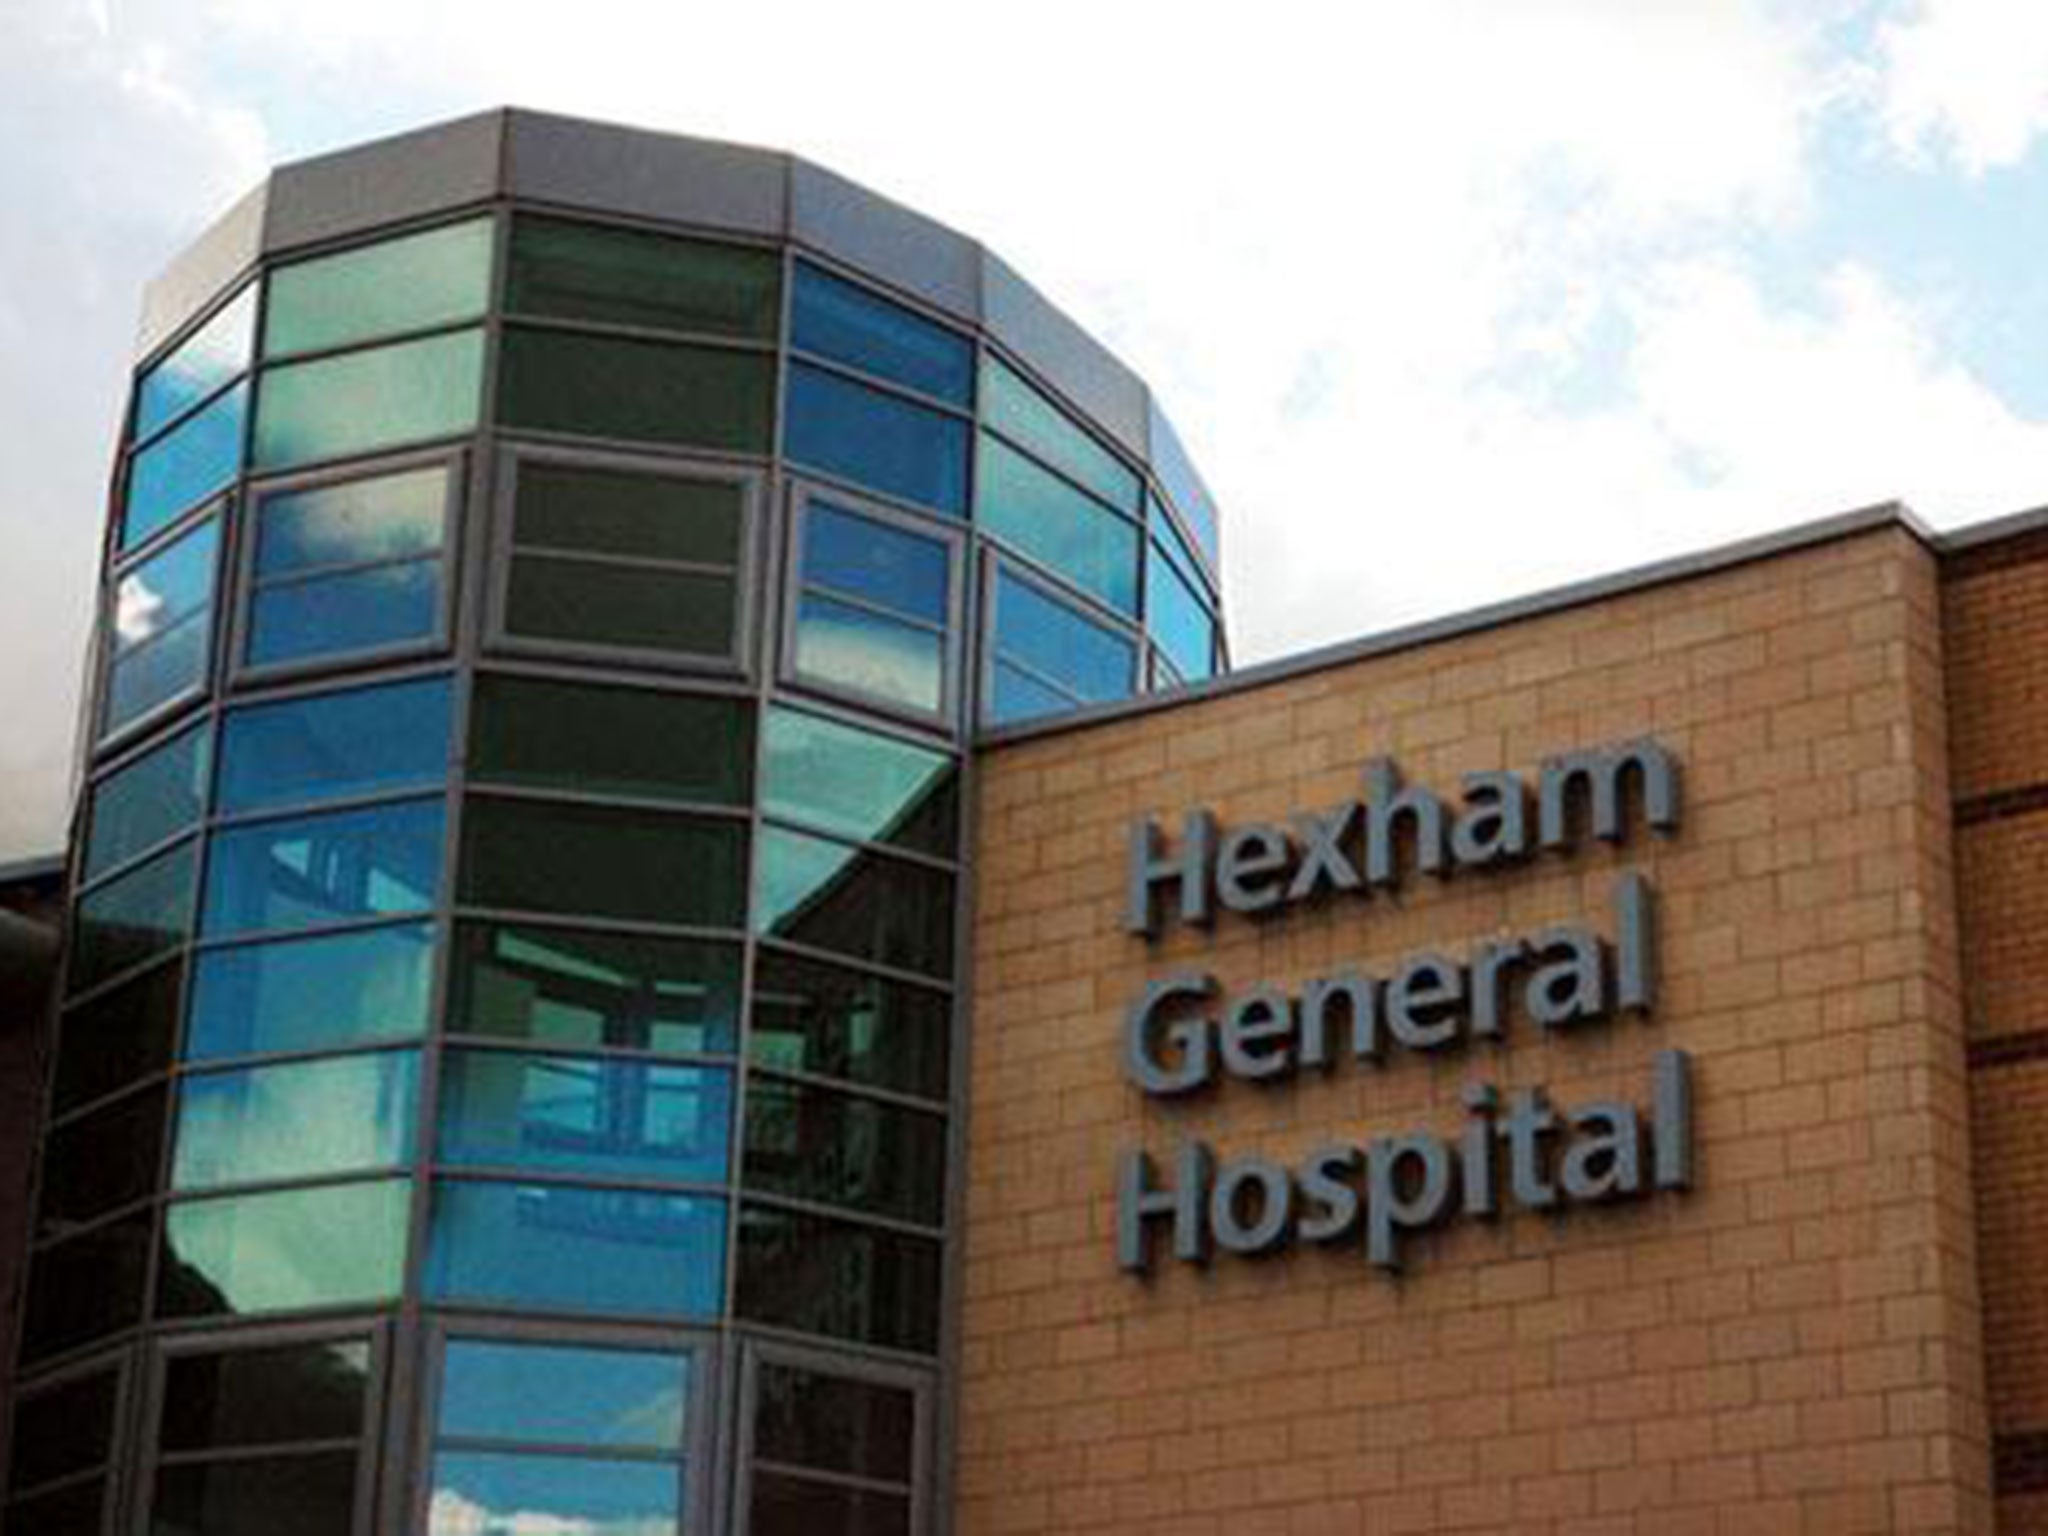 Accounts for Hexham General Hospital SPC Holdings show that it made a profit of £1.36m last year